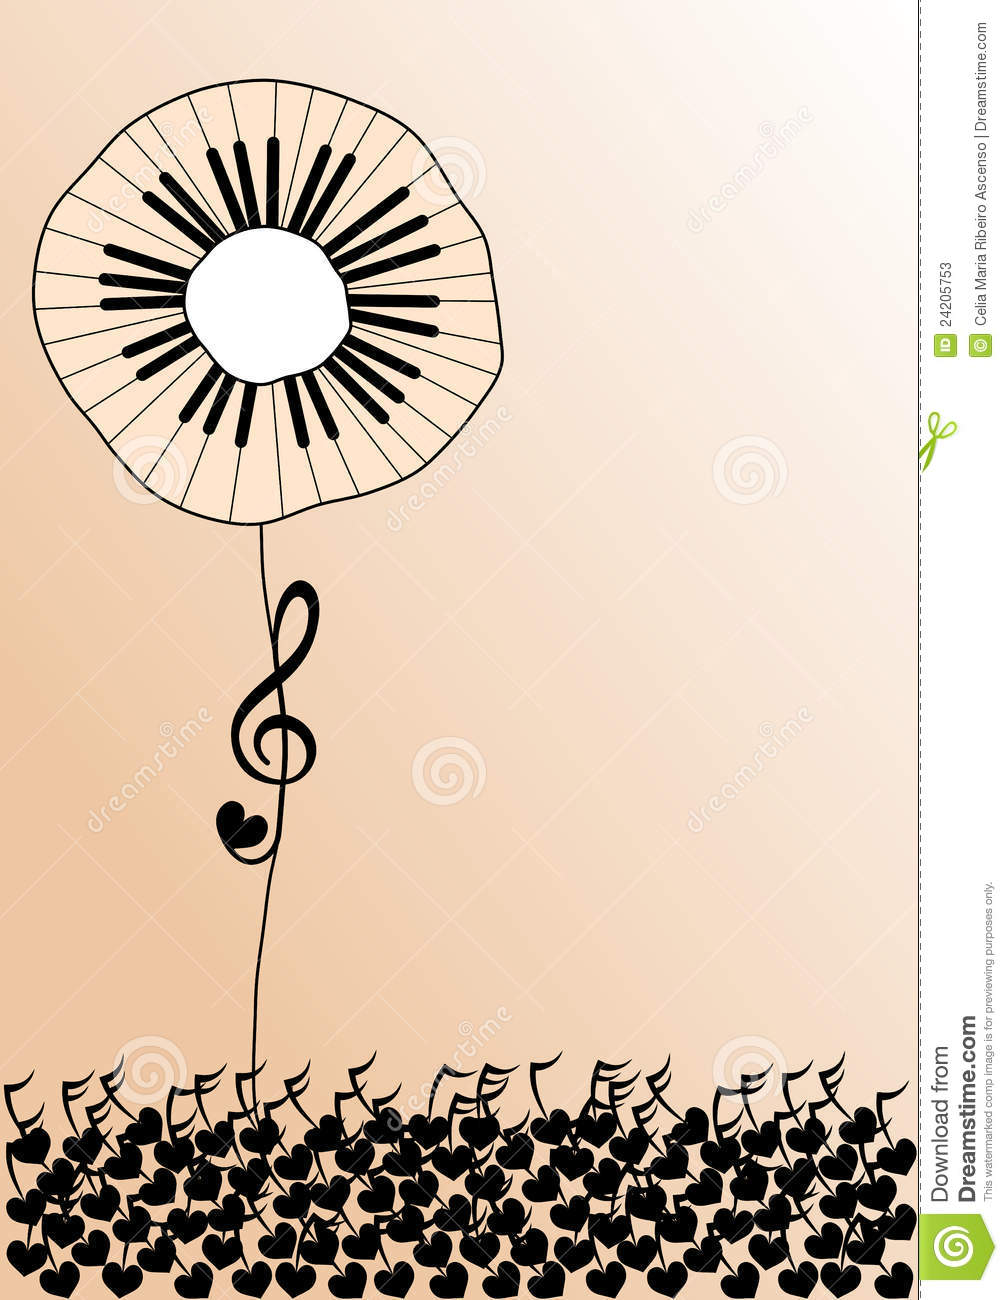 Source URL httpkootationcommusic musical notes nature passion